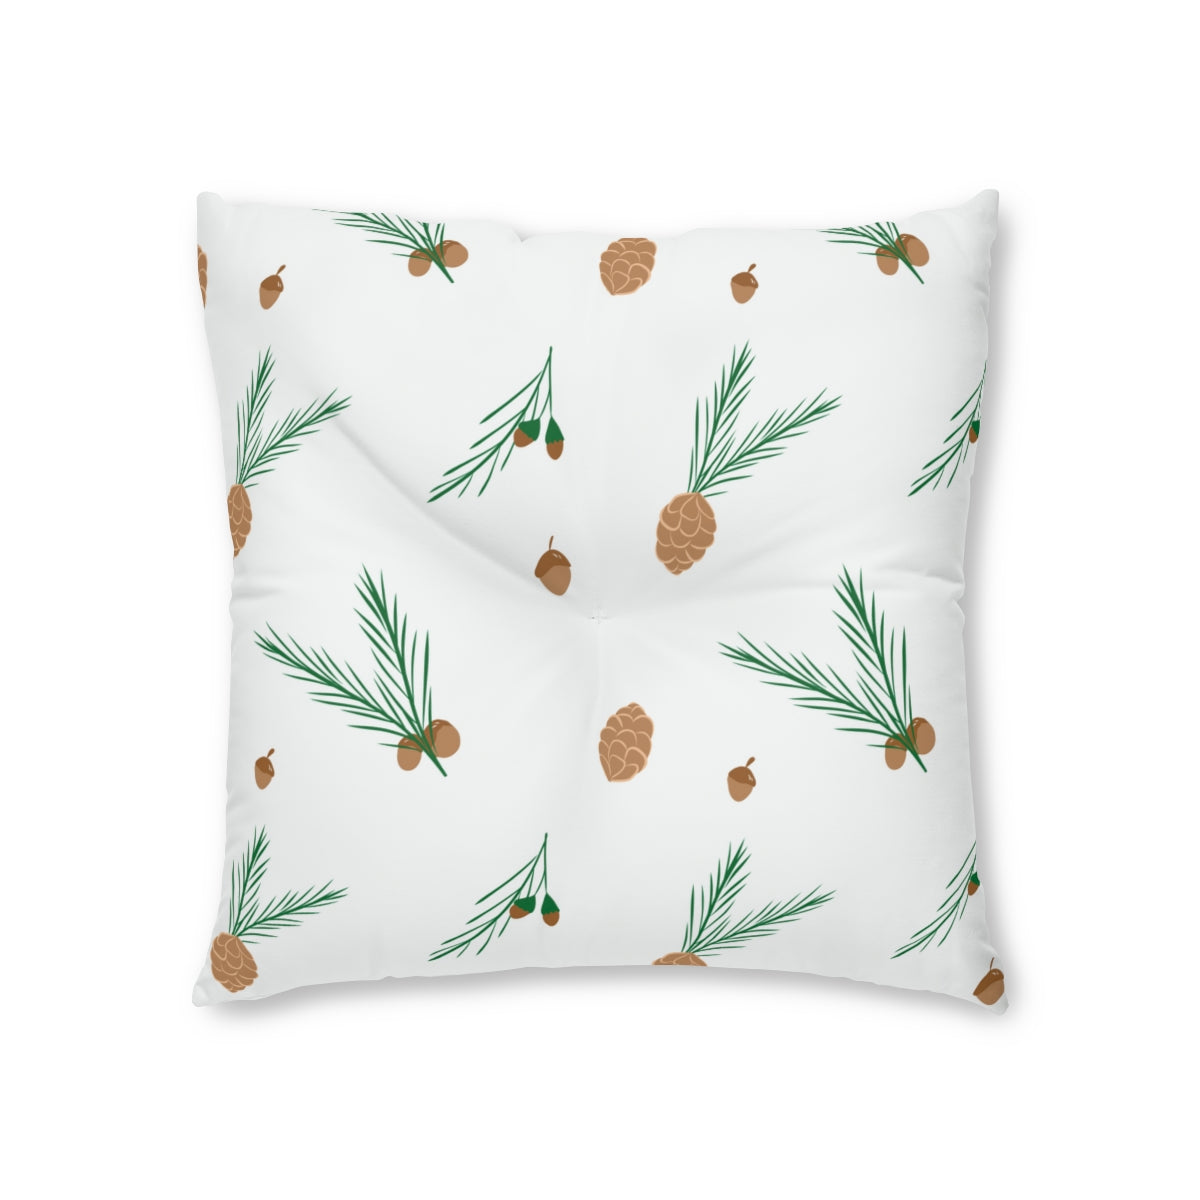 Lifestyle Details - White Square Tufted Holiday Floor Pillow - Pinecones - 26x26 - Front View